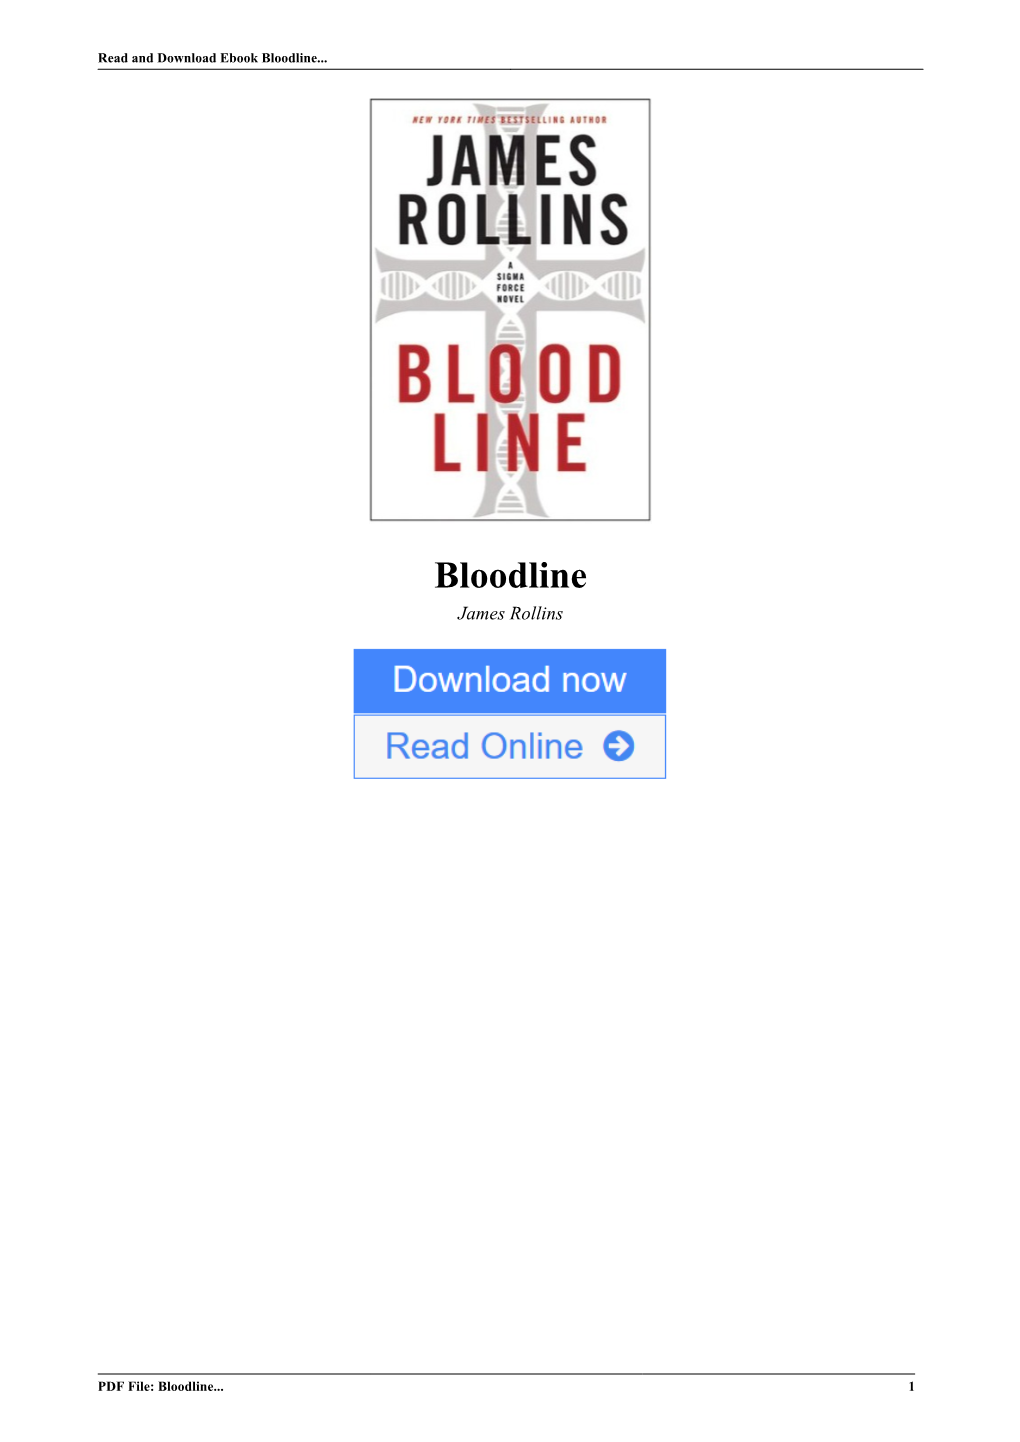 Bloodline by James Rollins, You Are in for an Action-Packed Roller Coaster Ride from the Beginning